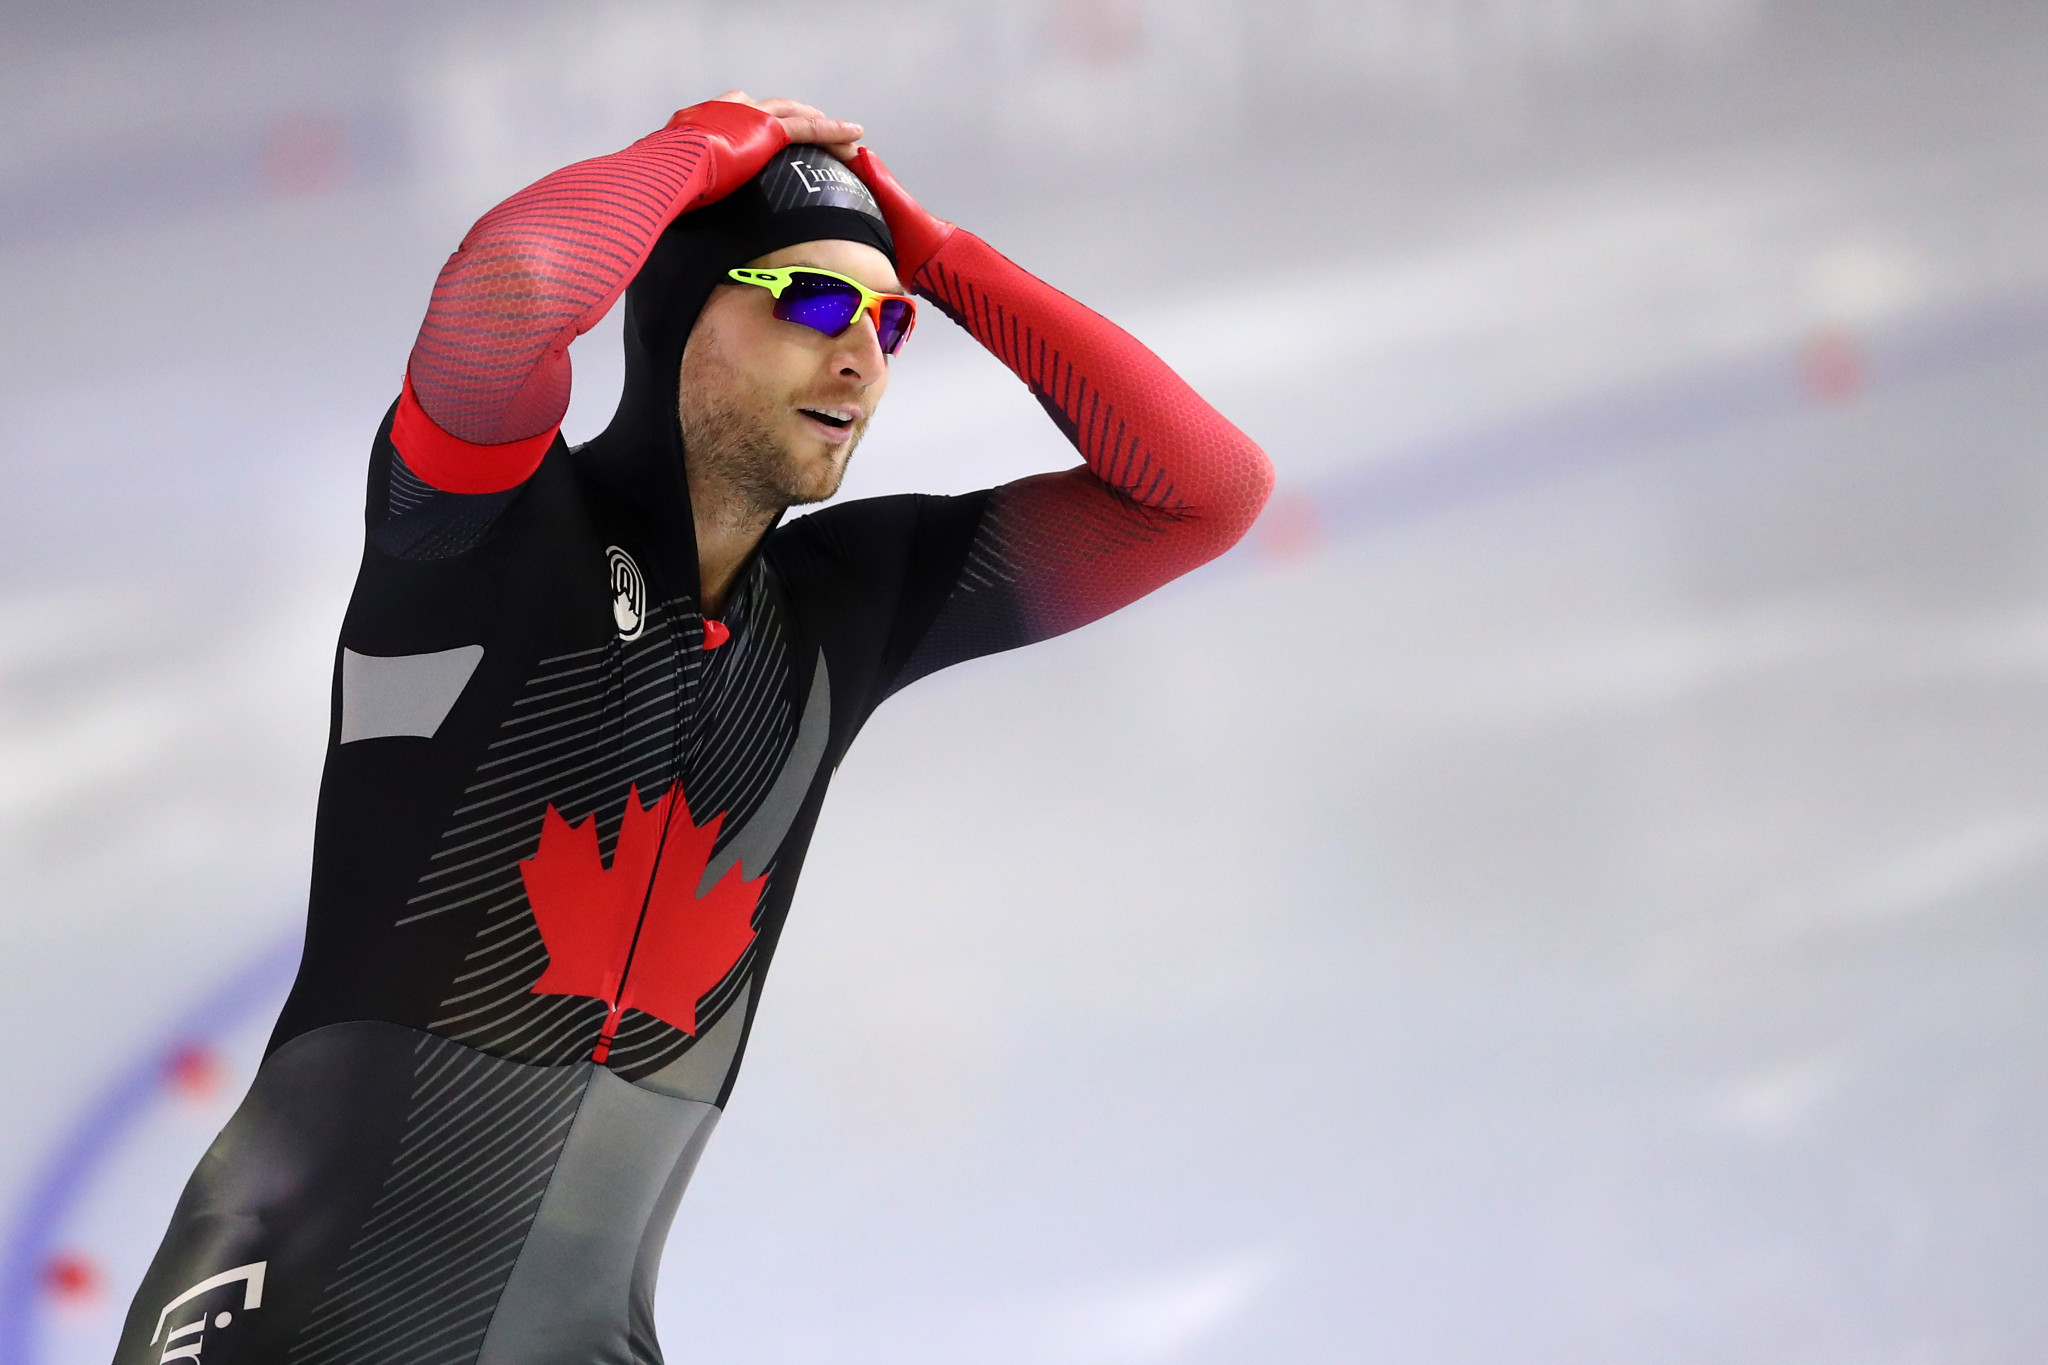 Canada's Laurent Dubreuil shattered the 500 metres speed skating national record ©Getty Images